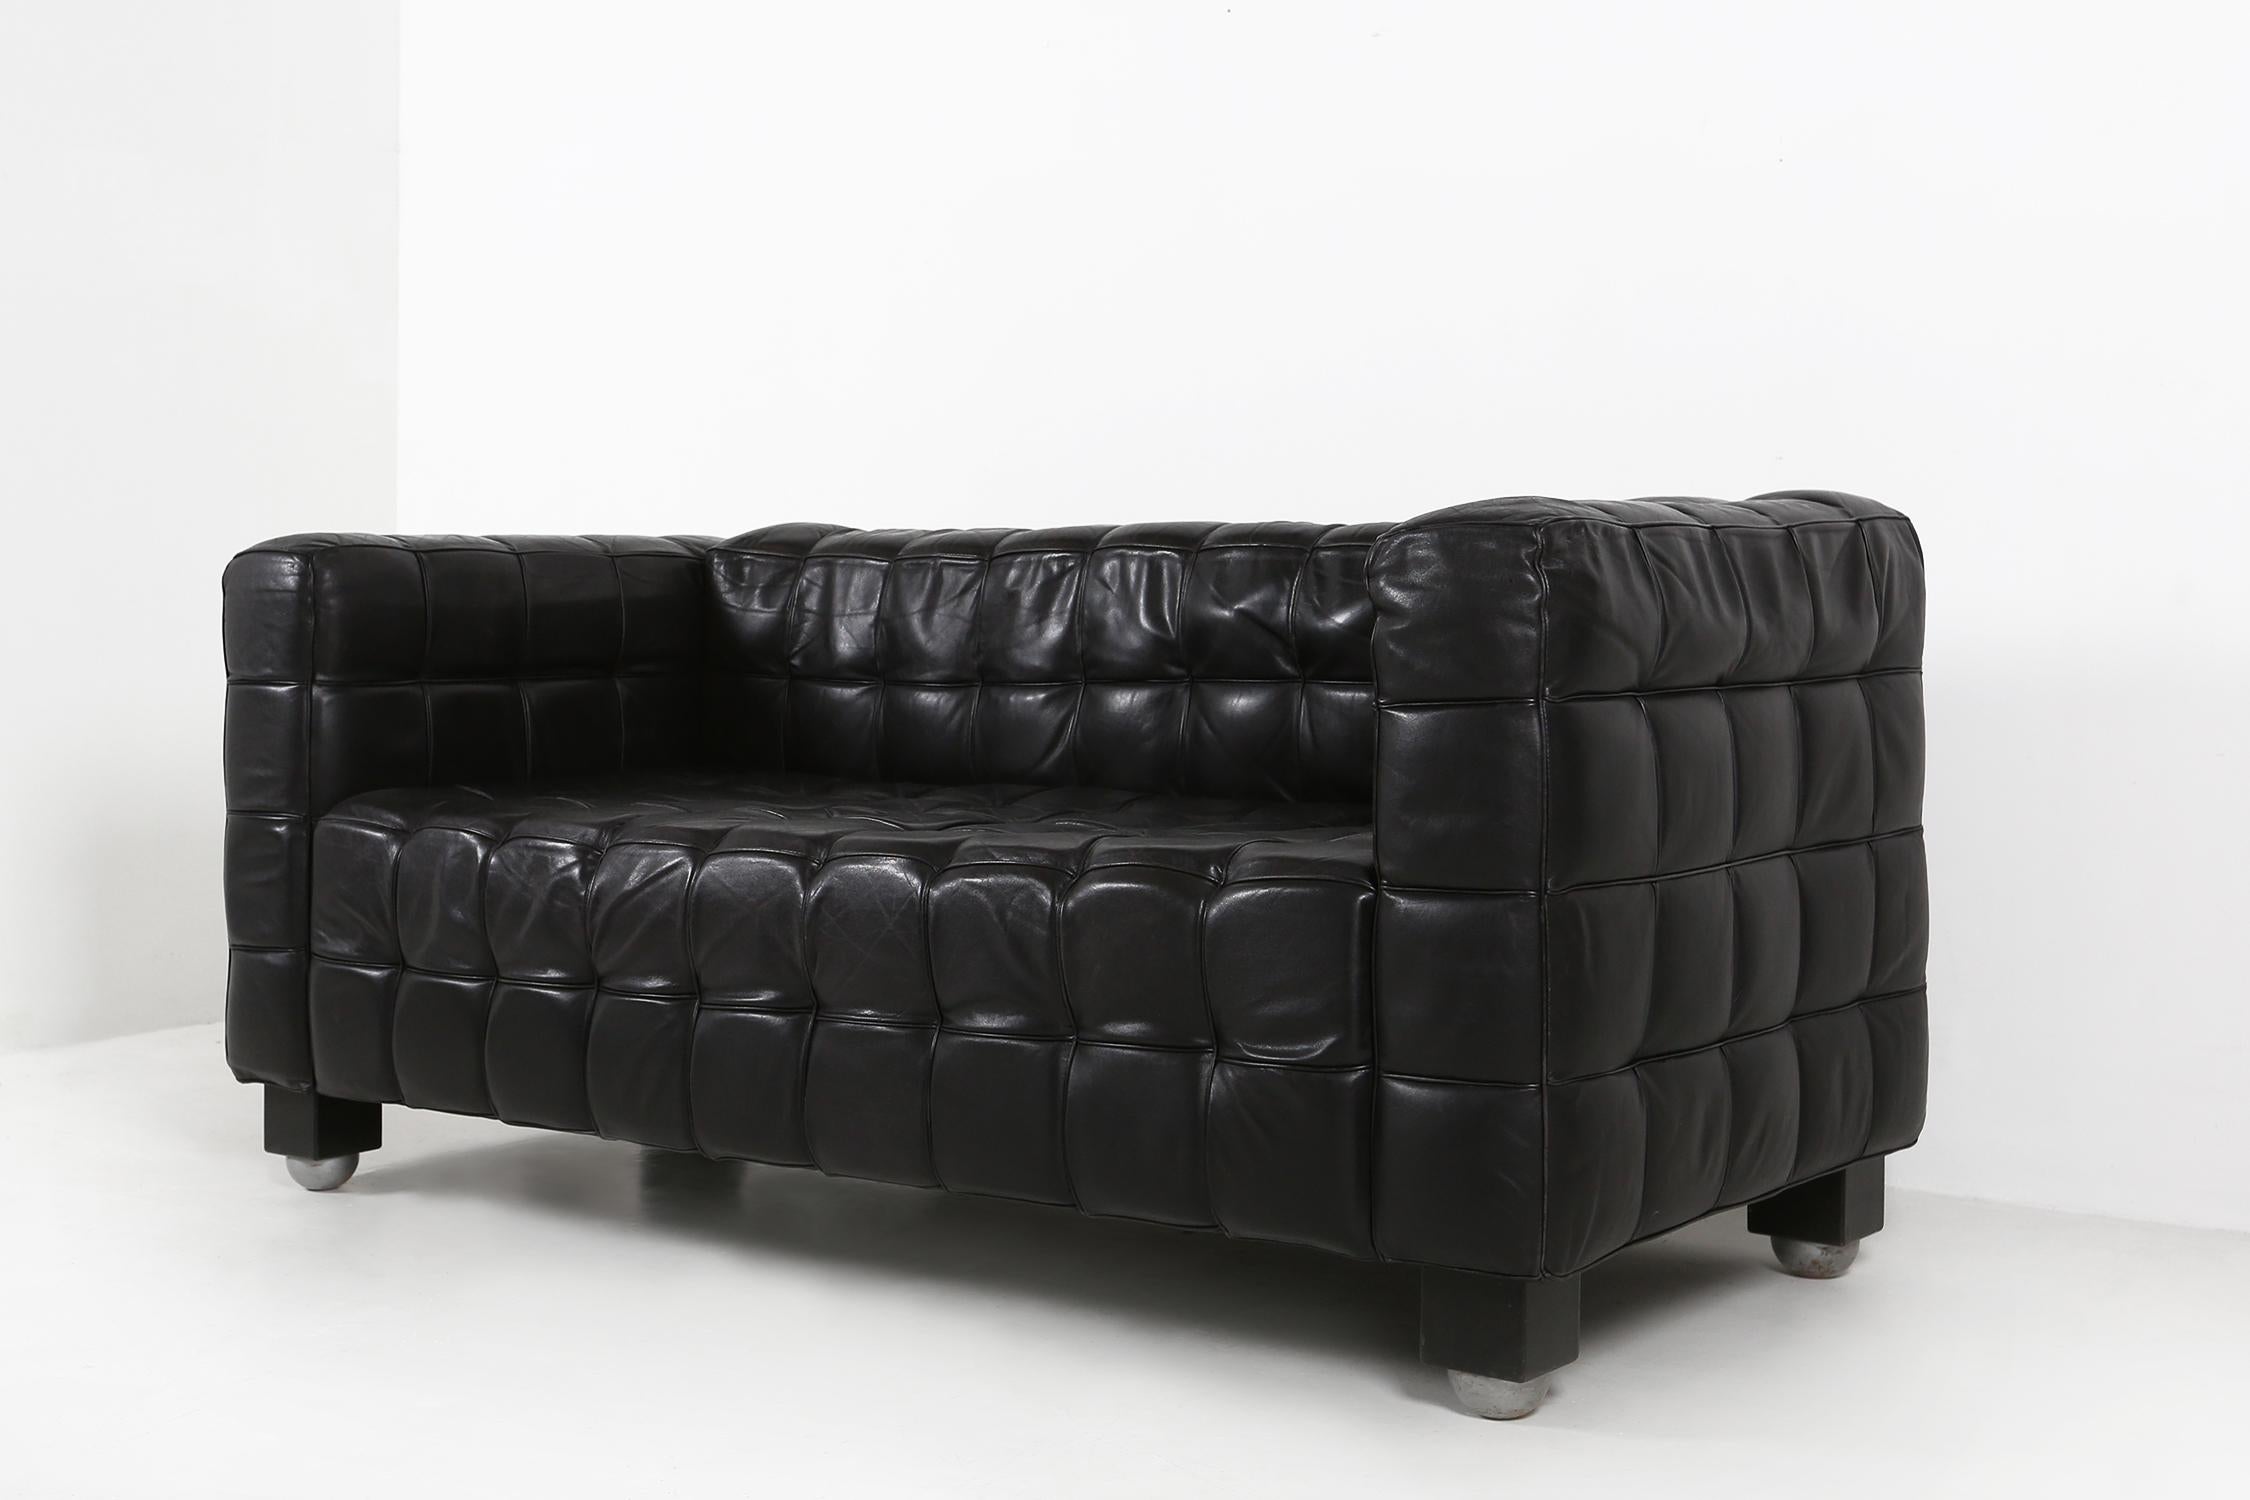 Black leather Kubus sofa model ''8020'' designed by Josef Hoffmann for Wittmann.
This Kubus sofa is designed in 1910 for the Buenos Aires exhibition to celebrate the Argentina's independence.
Since 1960, the sofa has been produced by the Austrian